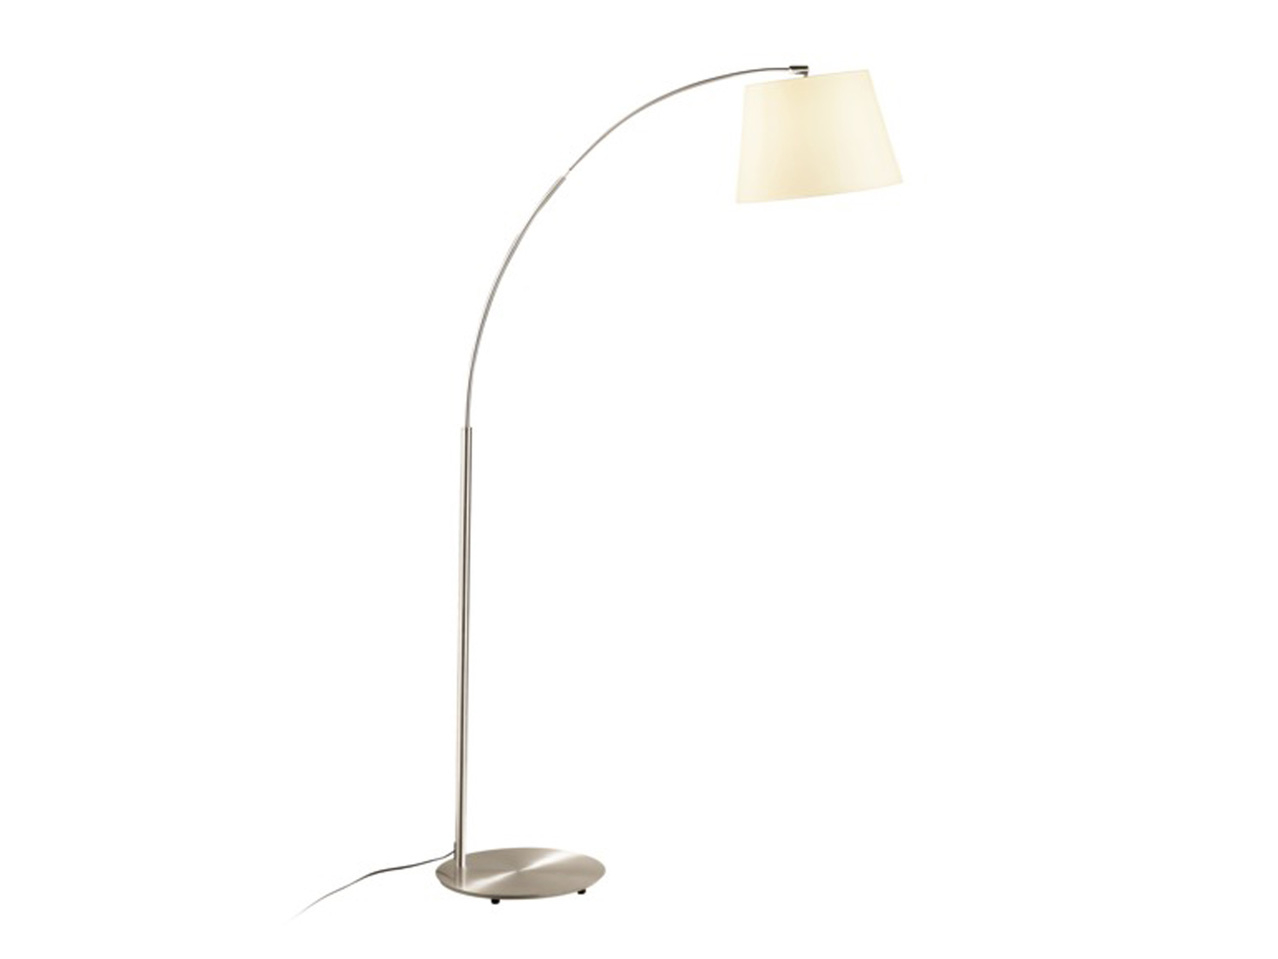 Livarno Lux Led Floor Lamp Lidl Ireland Specials Archive intended for sizing 1278 X 959